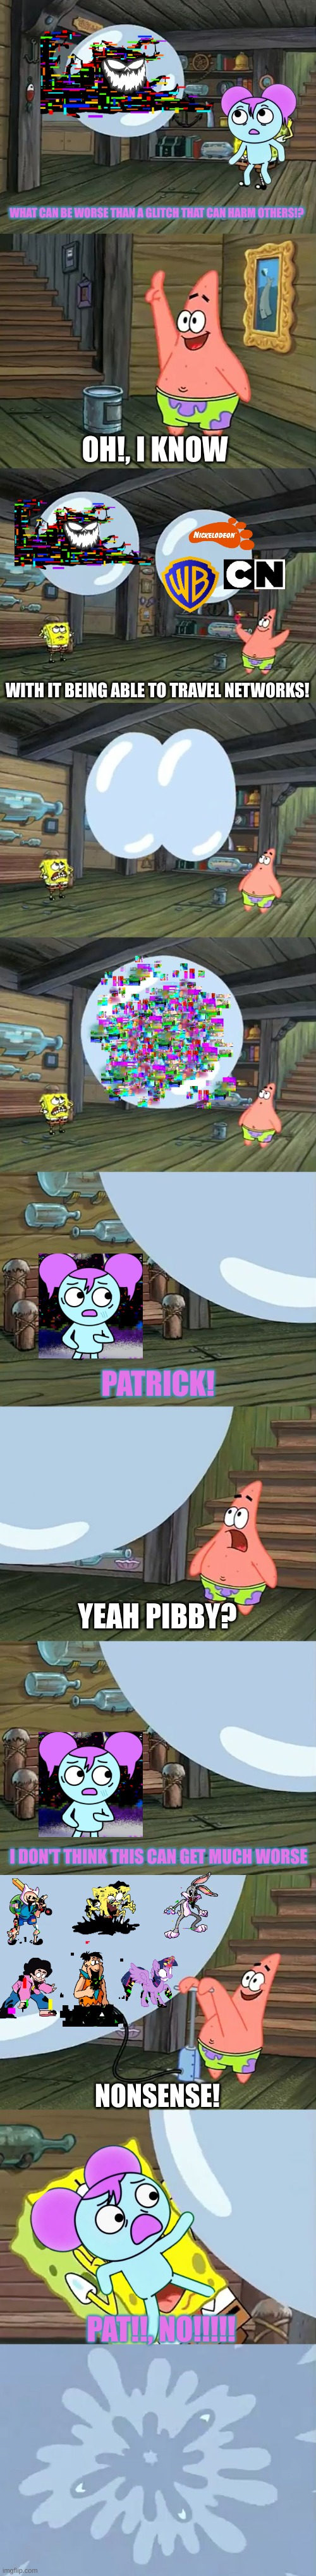 Spongebob Two Giant Paint Bubbles | WHAT CAN BE WORSE THAN A GLITCH THAT CAN HARM OTHERS!? OH!, I KNOW; WITH IT BEING ABLE TO TRAVEL NETWORKS! PATRICK! YEAH PIBBY? I DON'T THINK THIS CAN GET MUCH WORSE; NONSENSE! PAT!!, NO!!!!! | image tagged in spongebob two giant paint bubbles | made w/ Imgflip meme maker